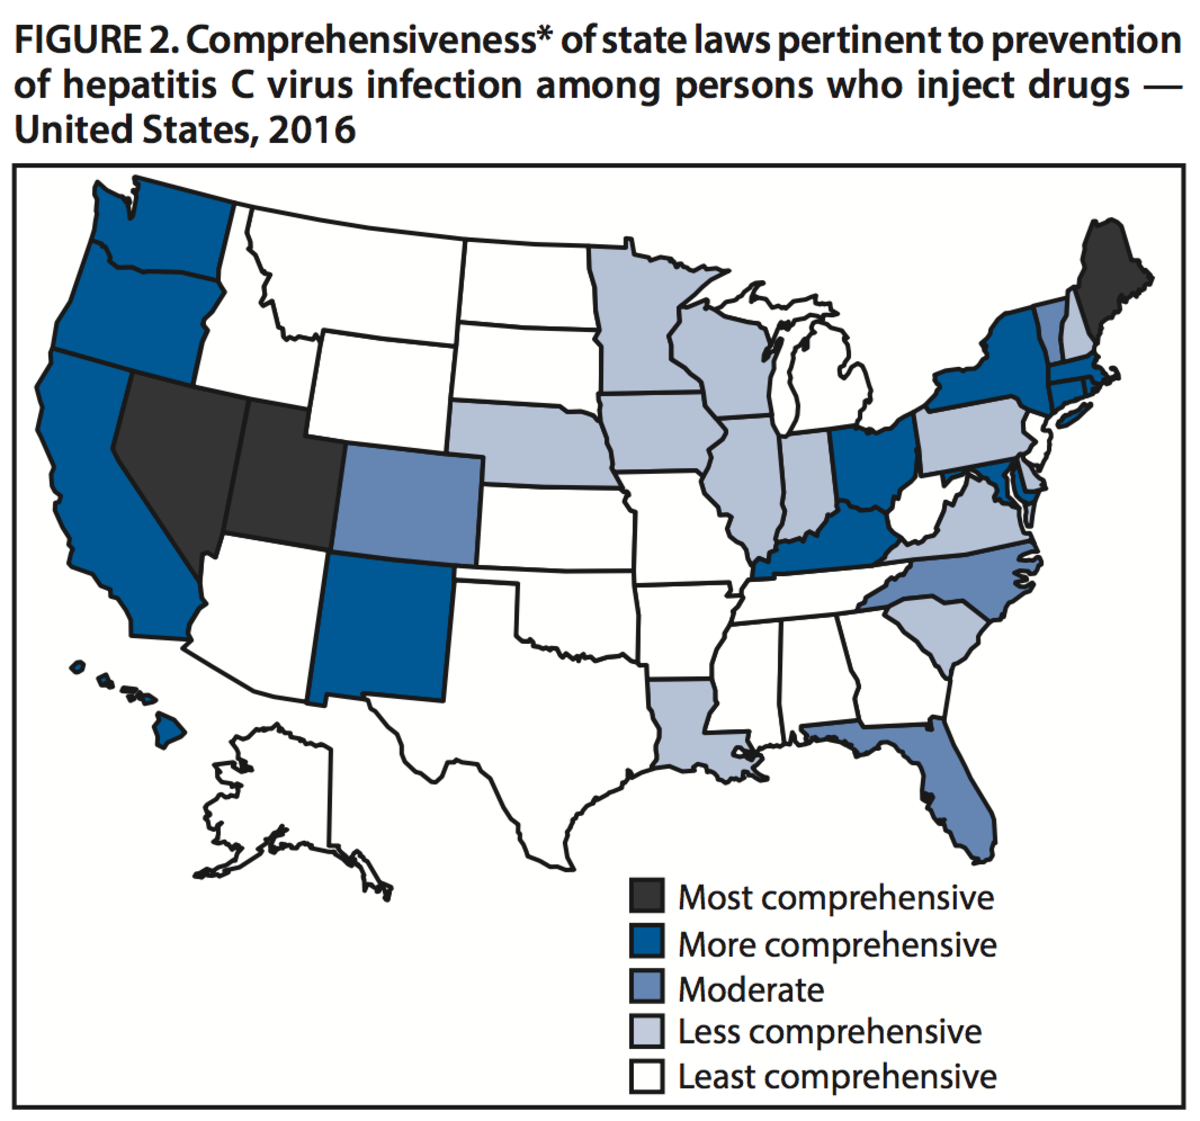 A map of state laws encouraging people to use clean needles when injecting drugs.